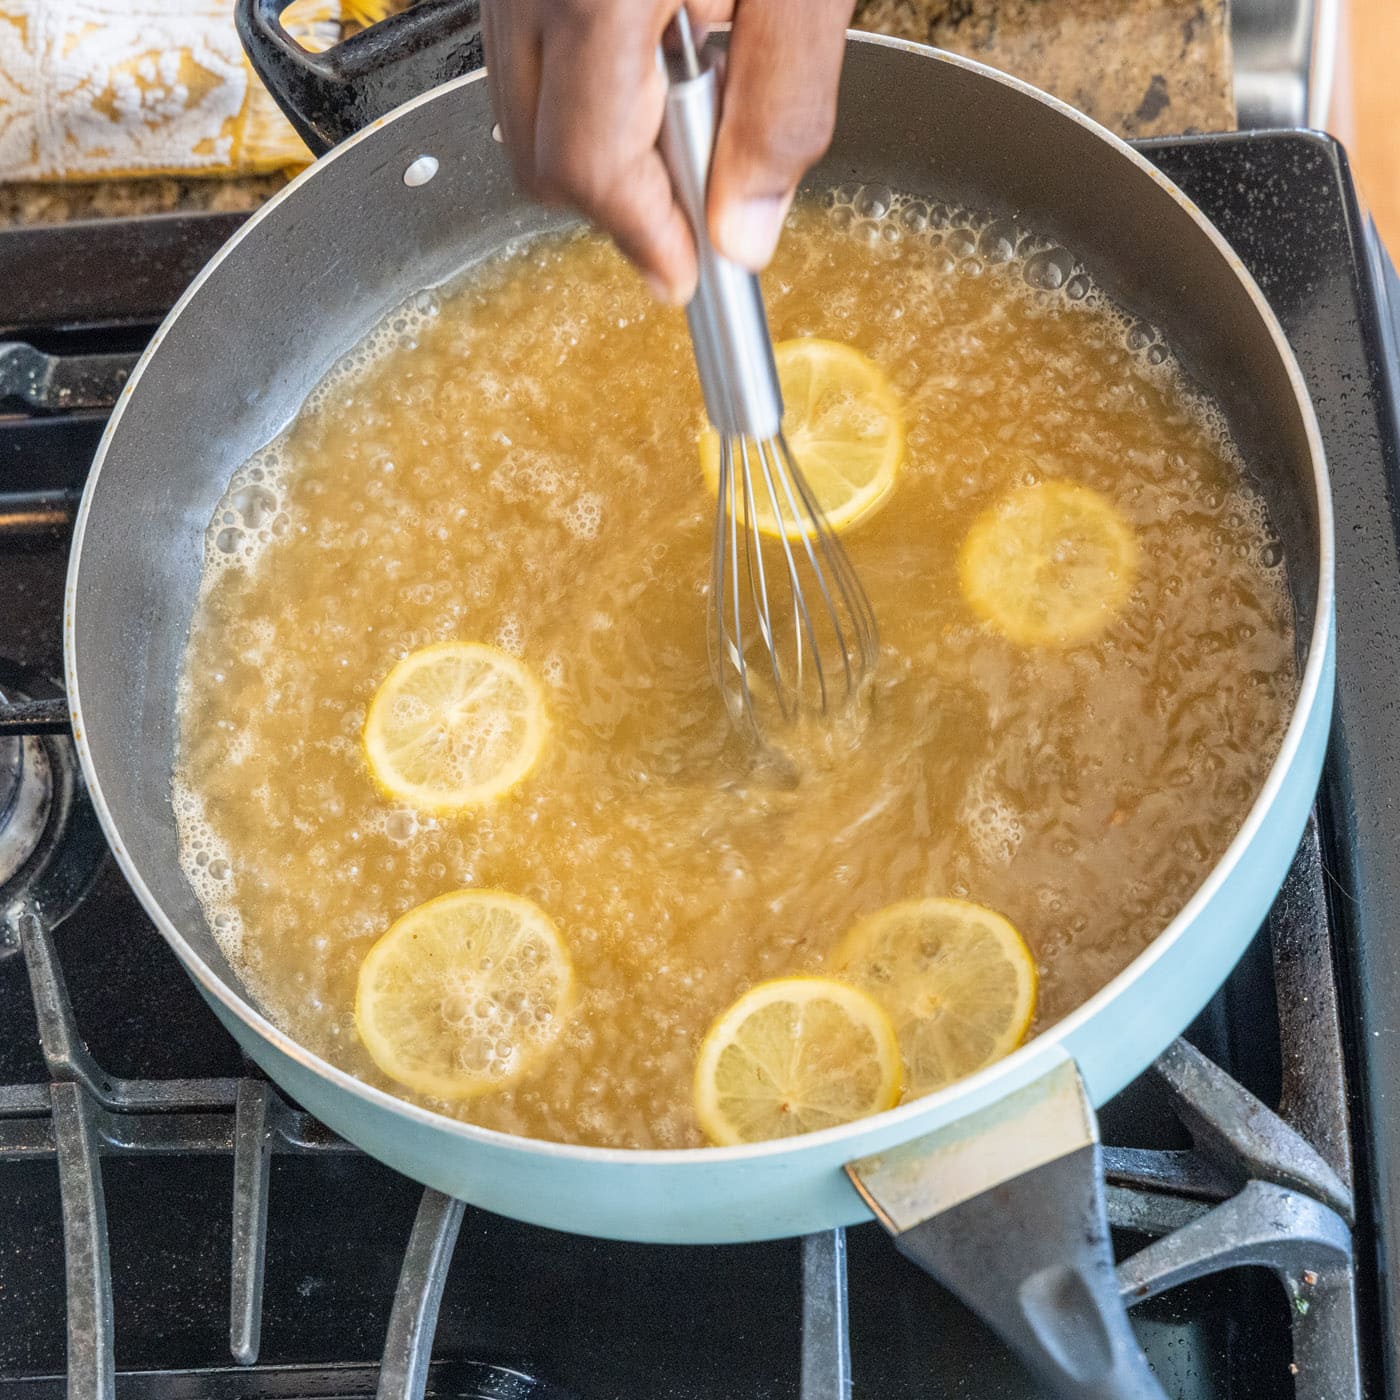 whisking lemon juice with white wine in a skillet